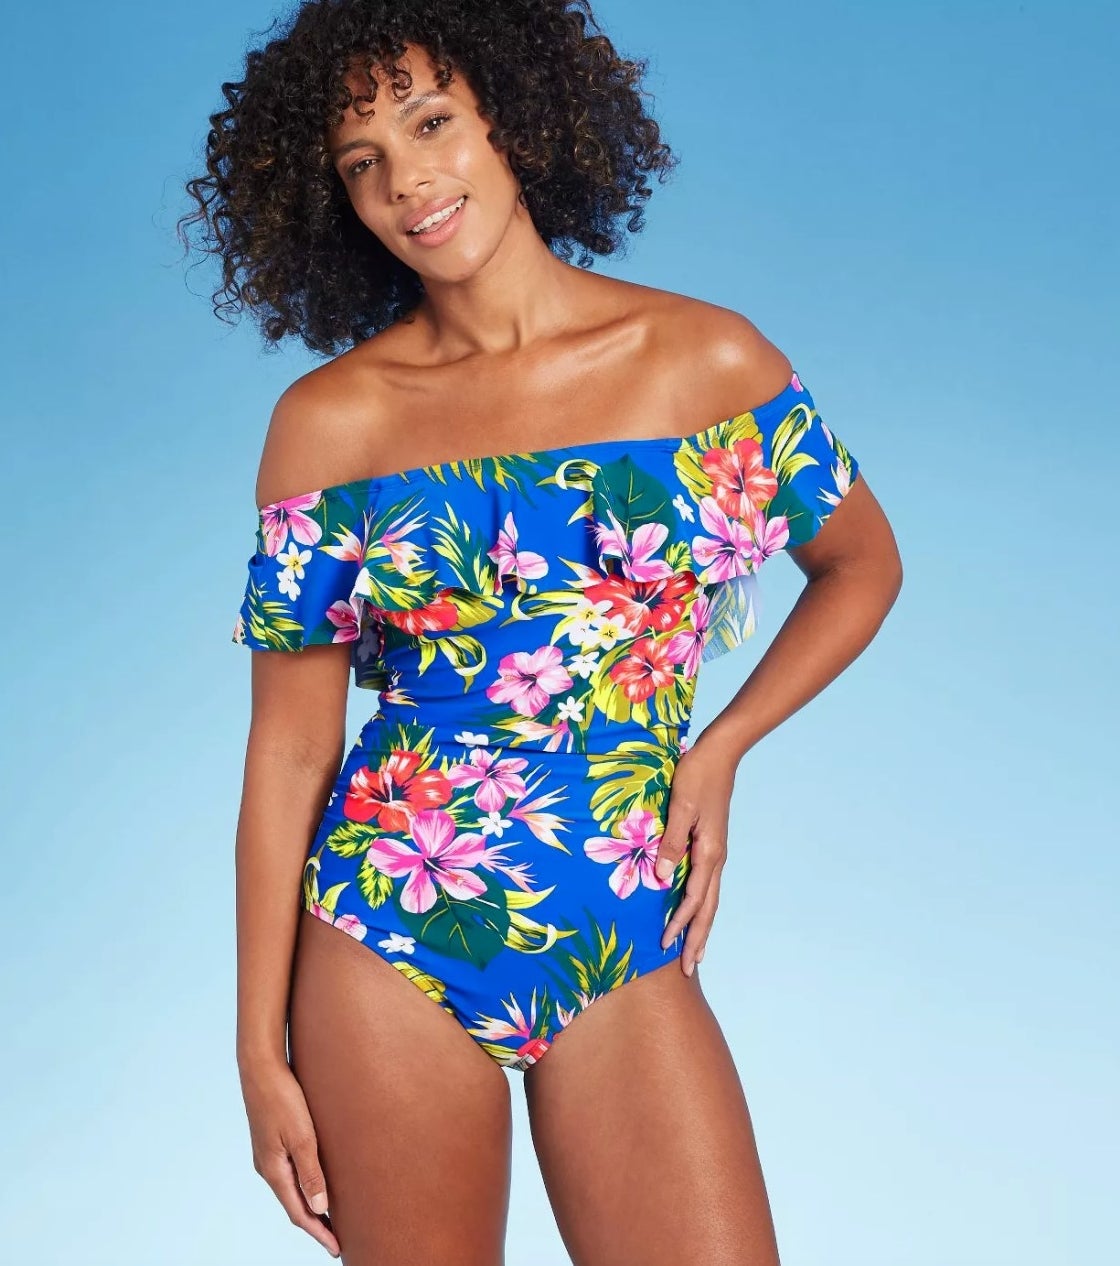 model wearing the blue floral bathing suit